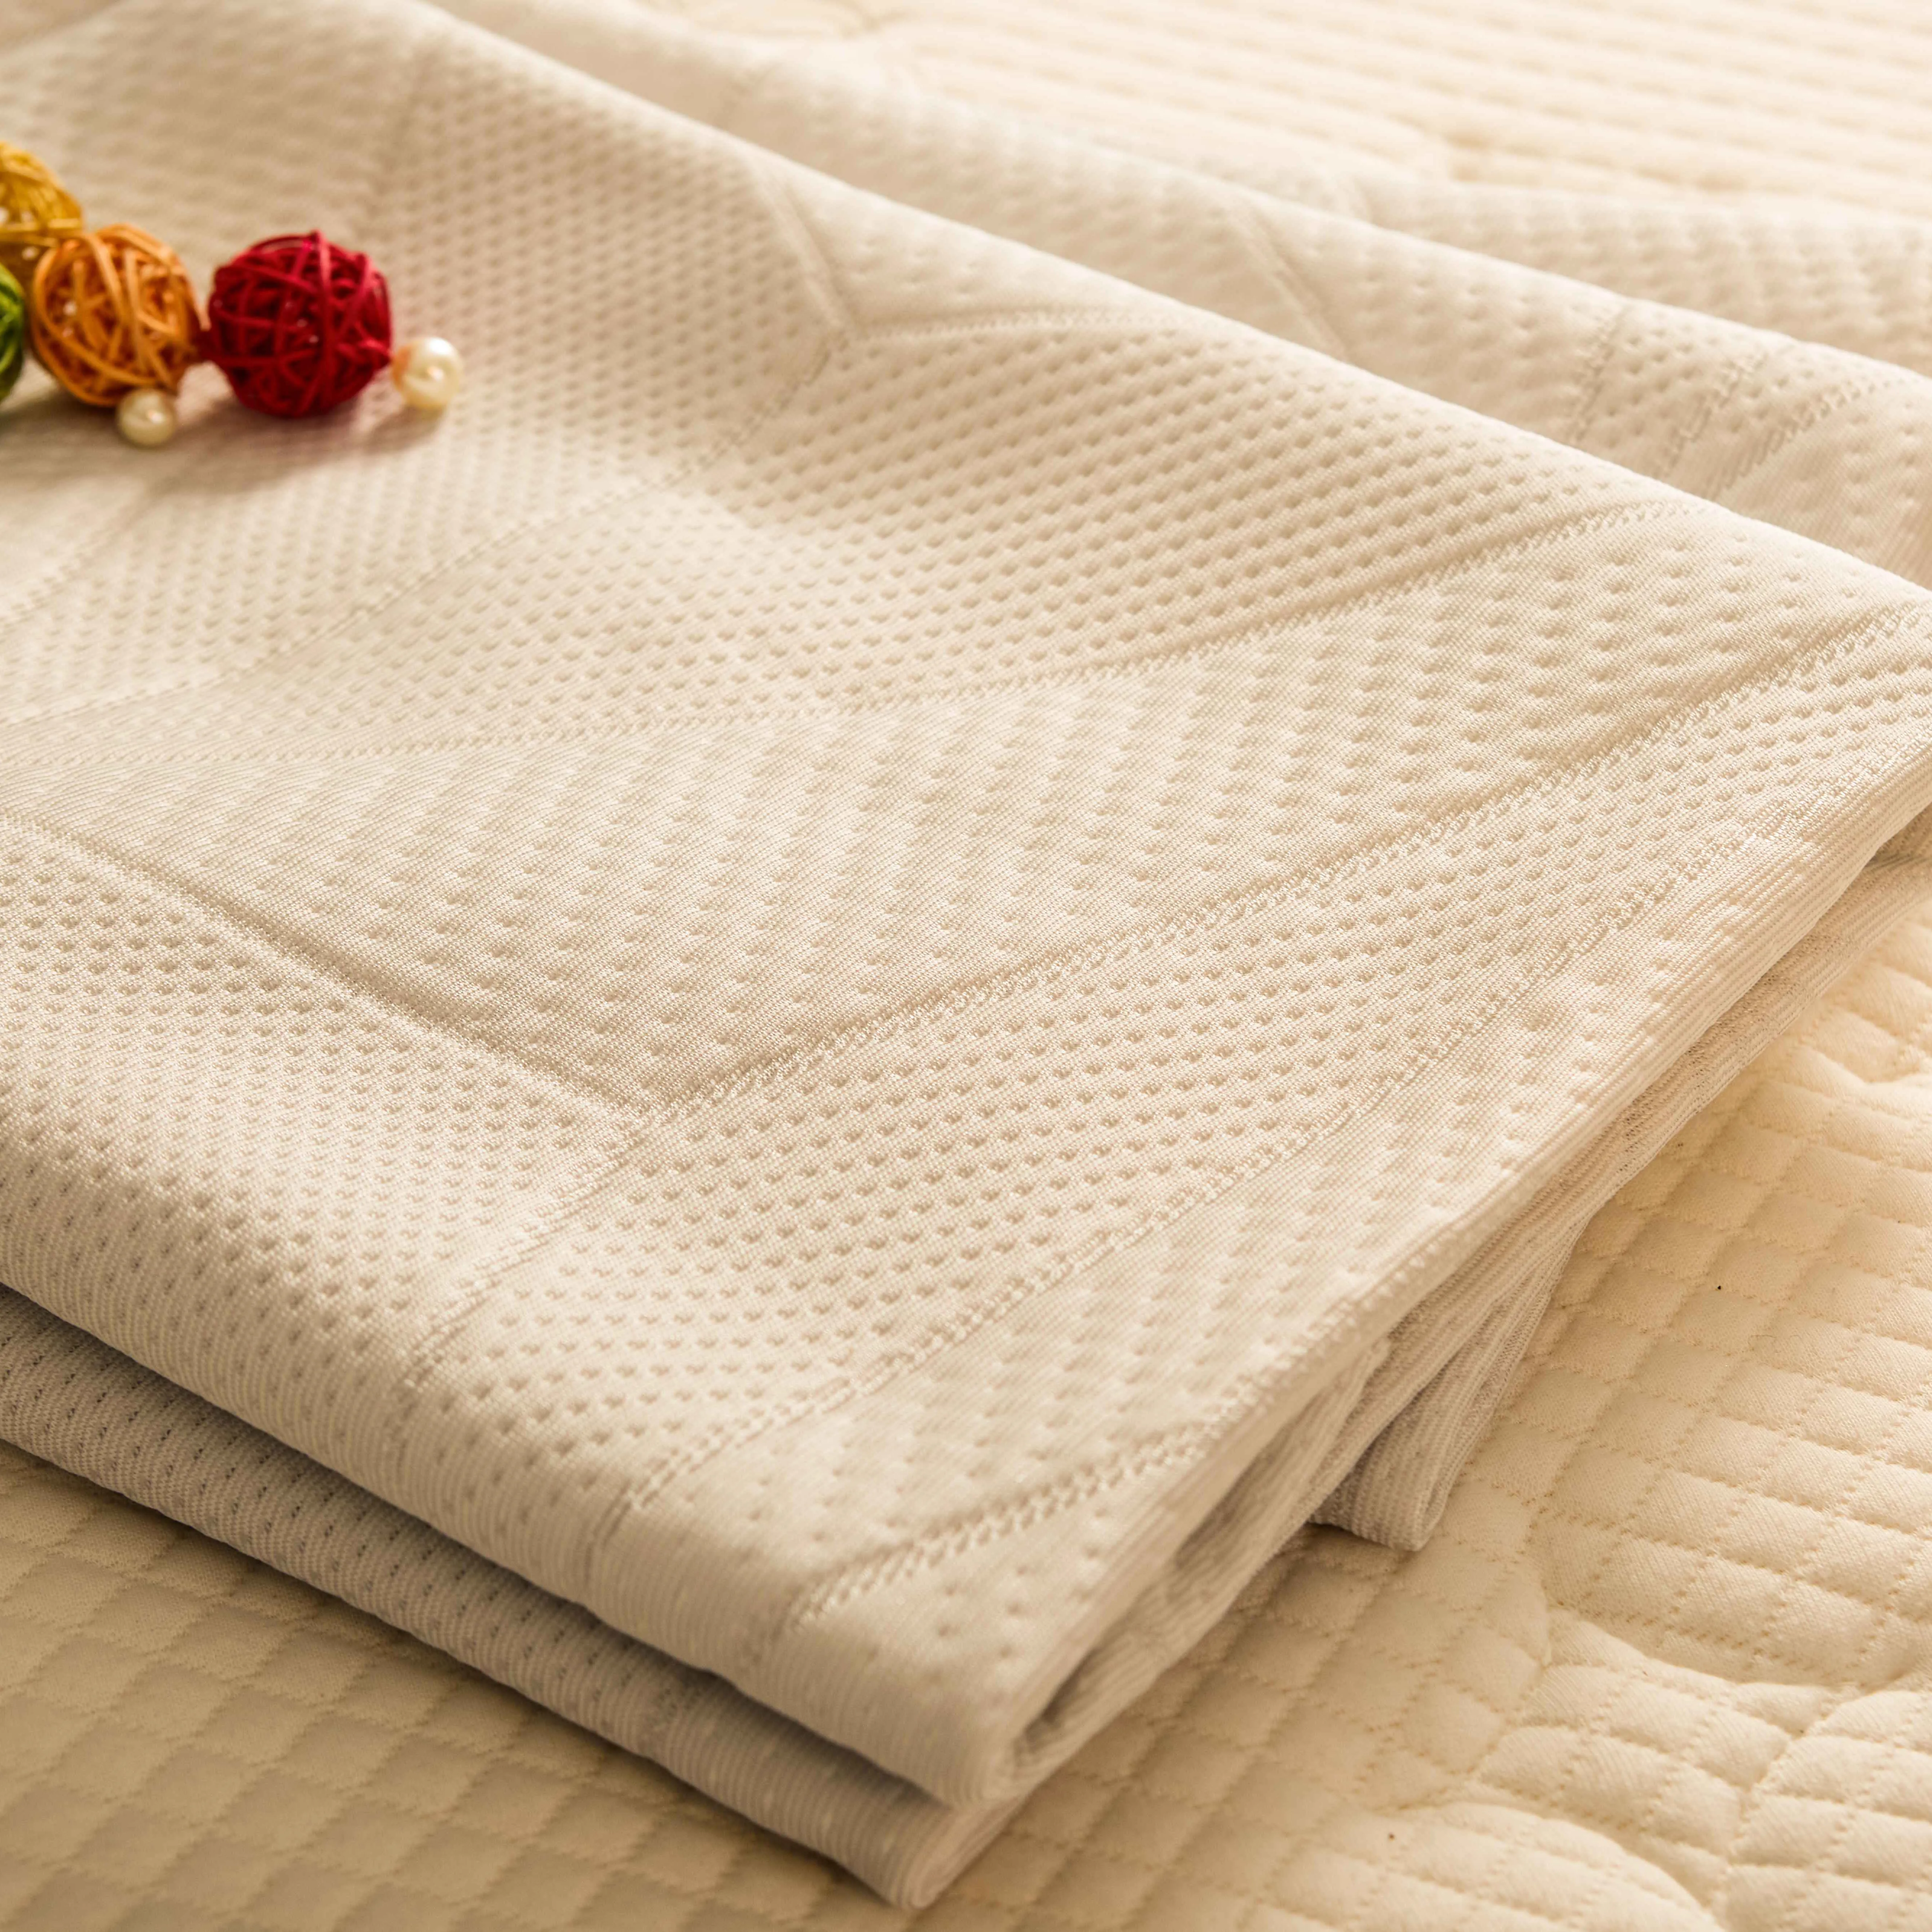 100% White Jacquard Cotton Knitted Polyester Mattress Fabric For Mattress Cover